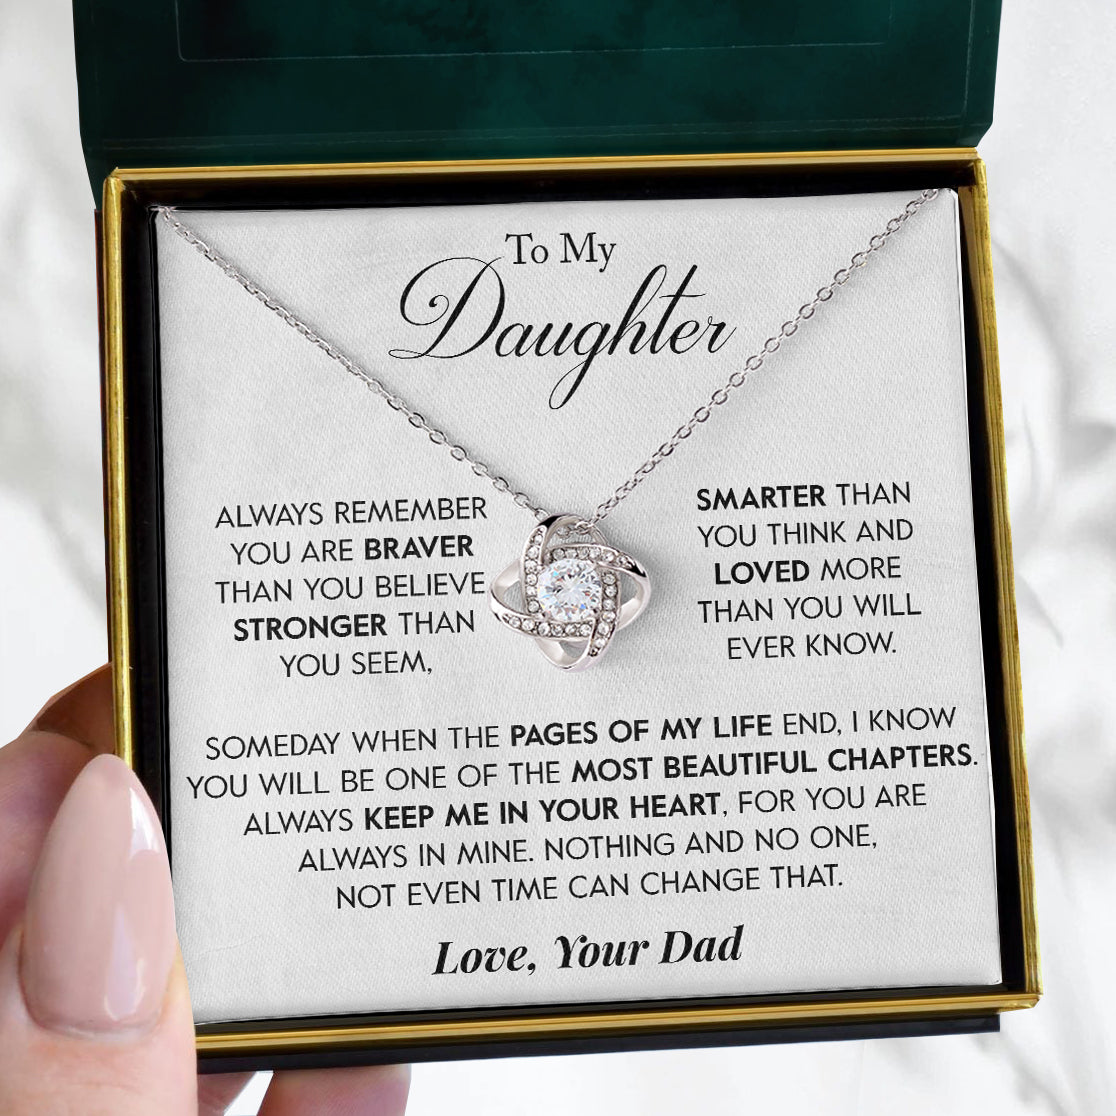 To My Daughter | "Keep Me In Your Heart" | Love Knot Necklace